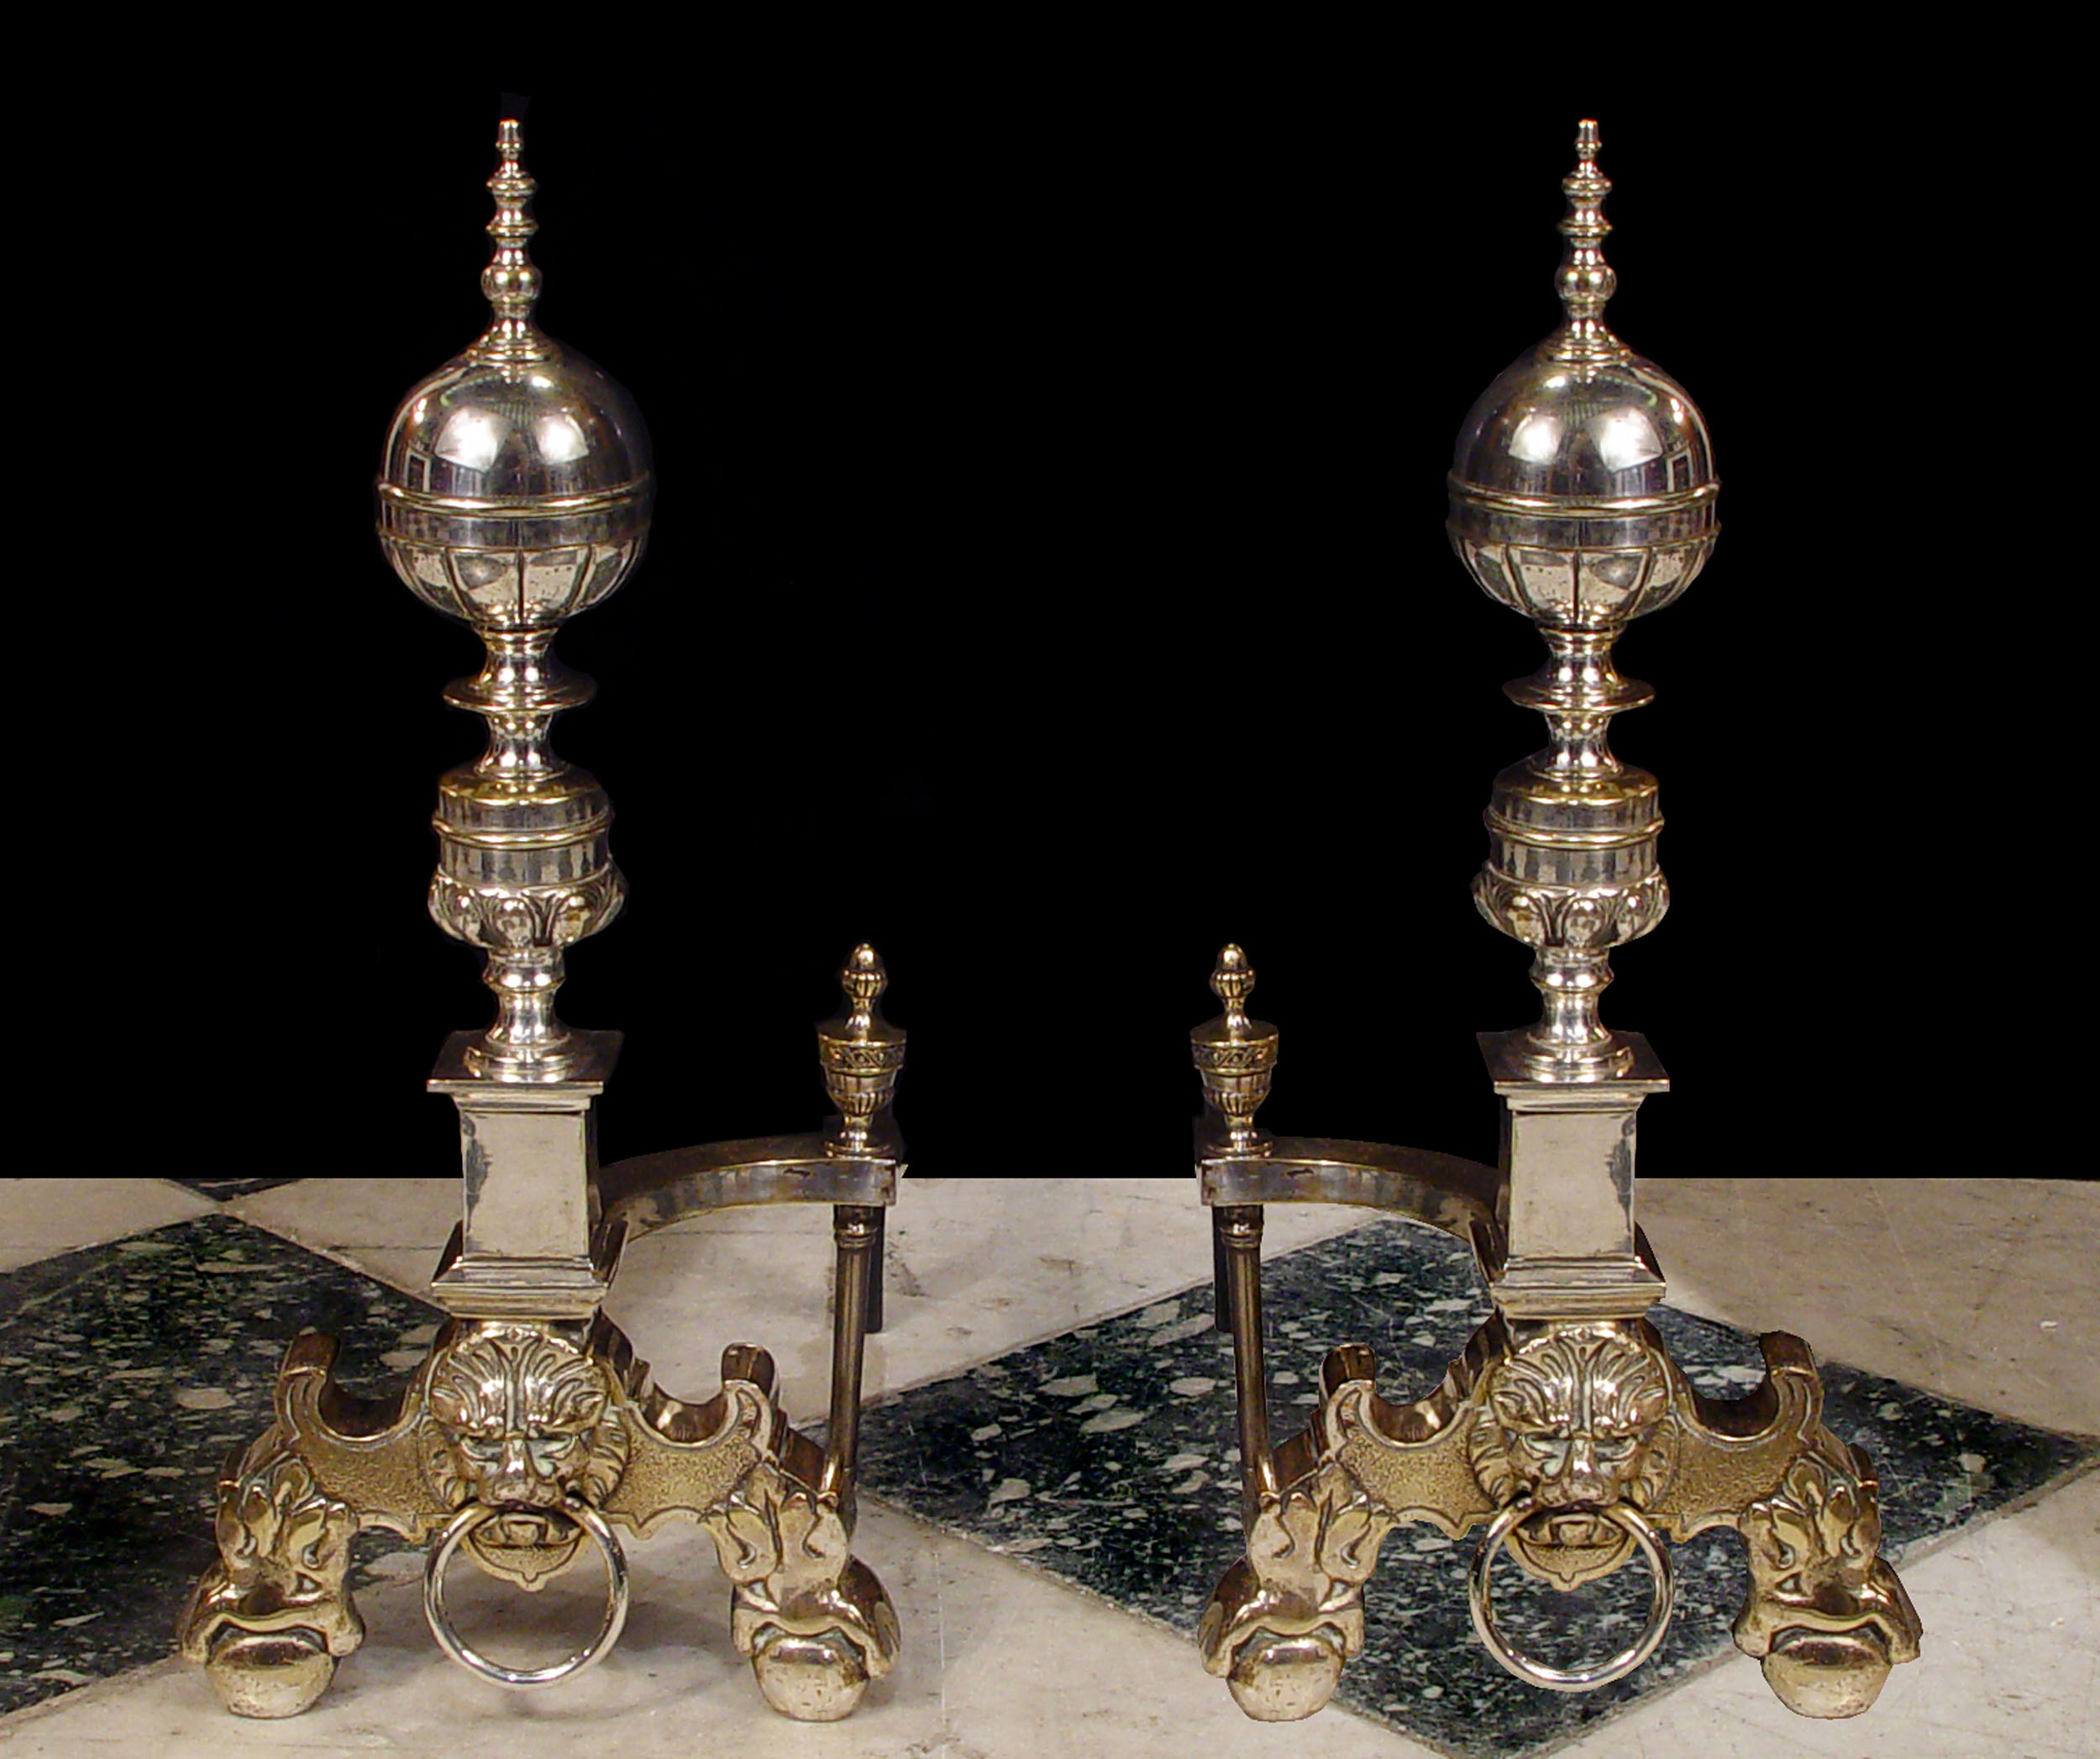 Pair of Silver Plated Baroque Style Andirons